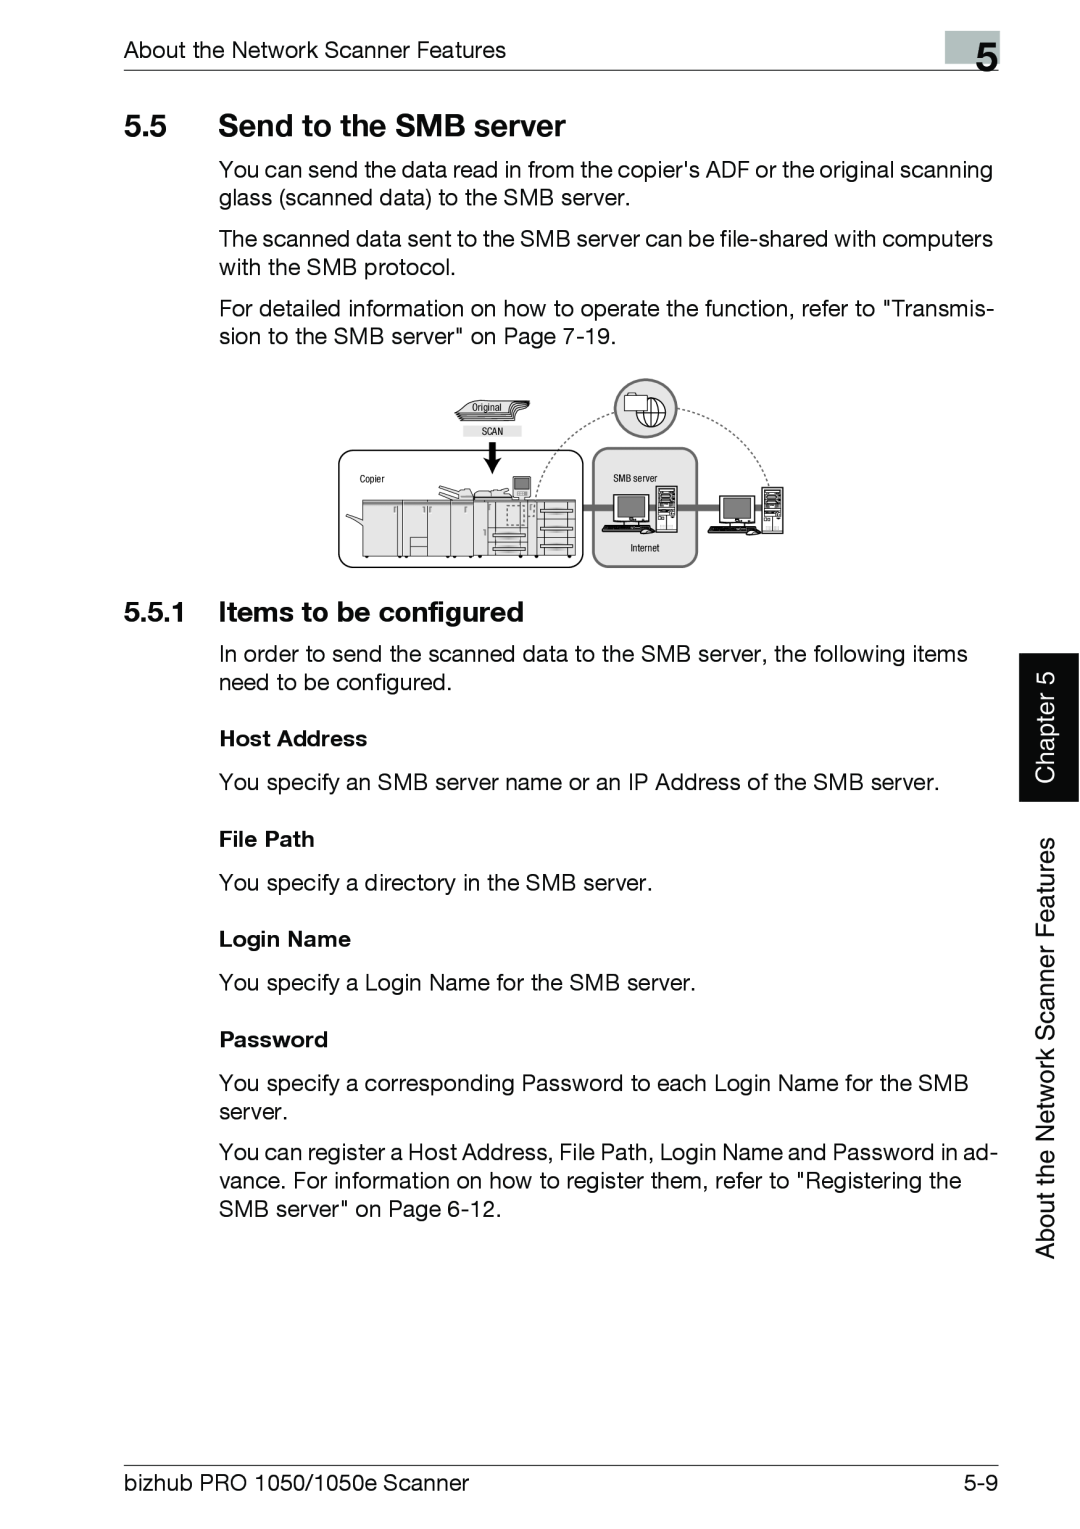 Konica Minolta 1050E 5.5Send to the SMB server, 5.5.1Items to be configured, Chapter, About the Network Scanner Features 